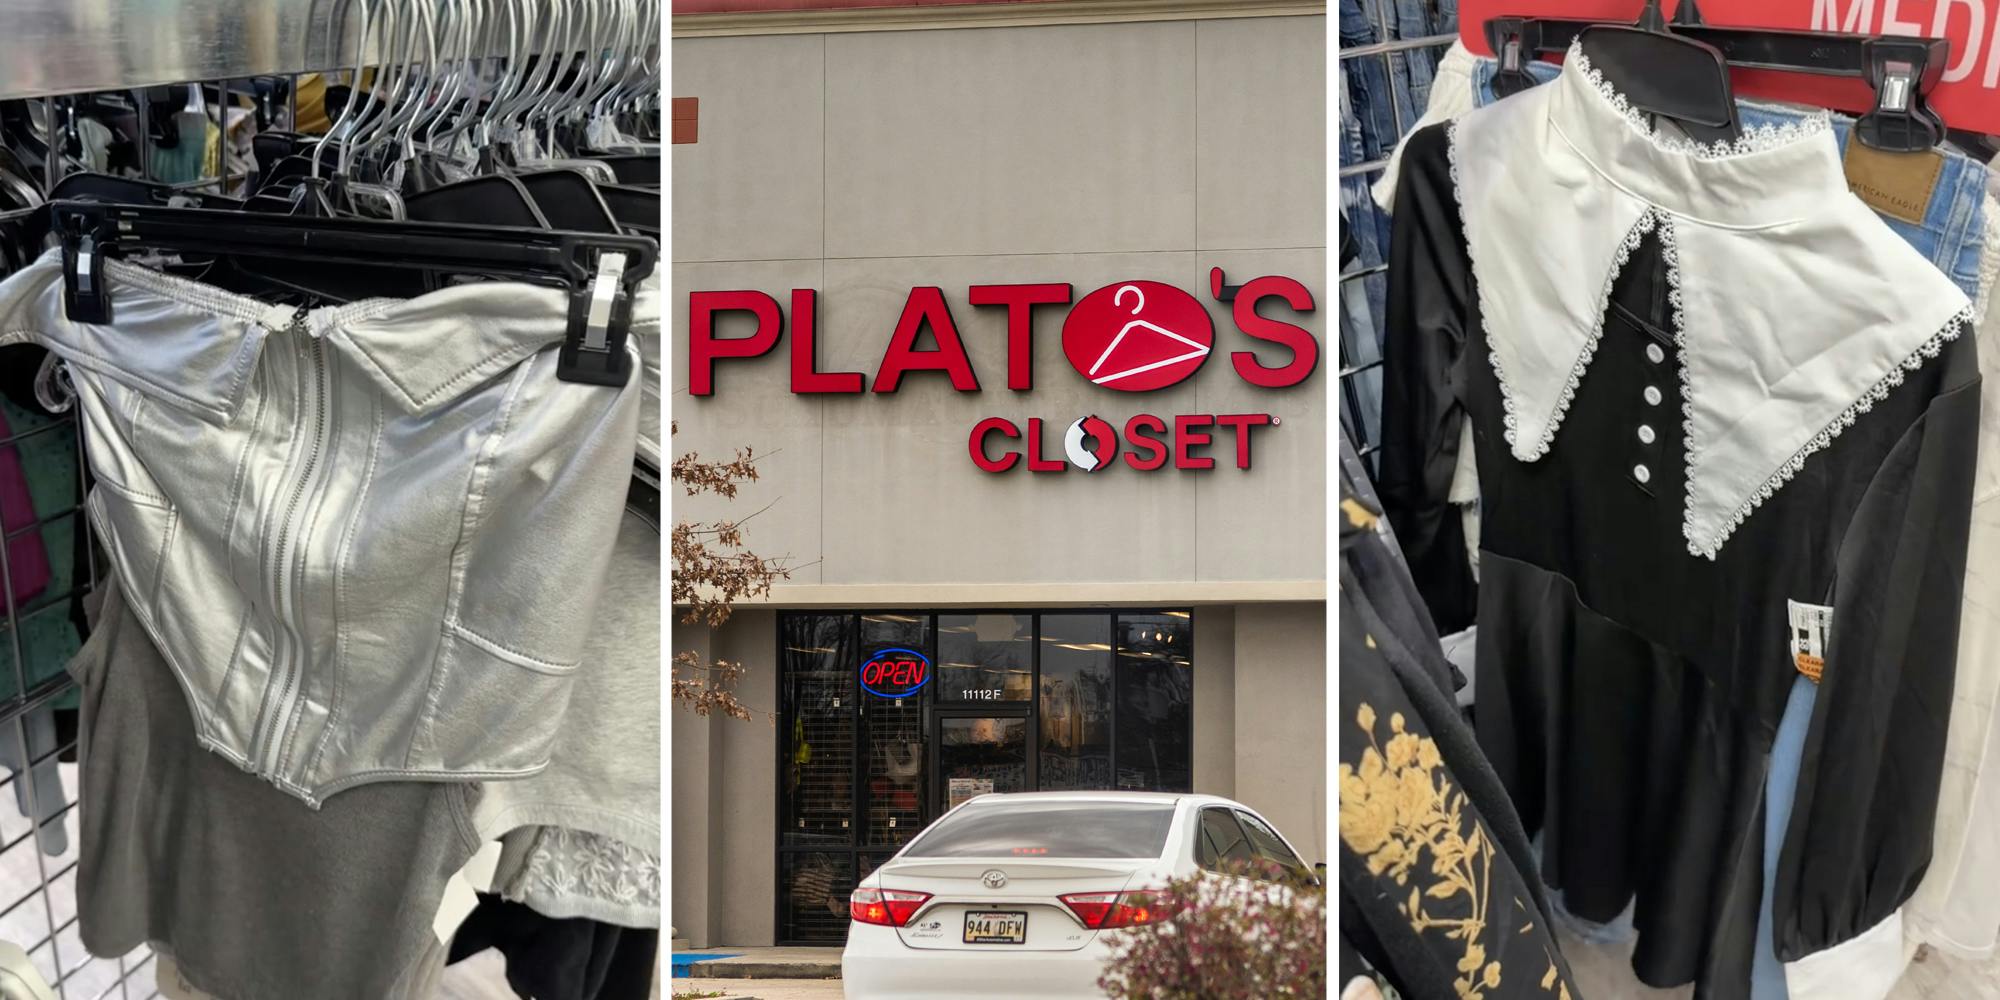 Customer Mocks Plato's Closet For Rejecting Her Clothes